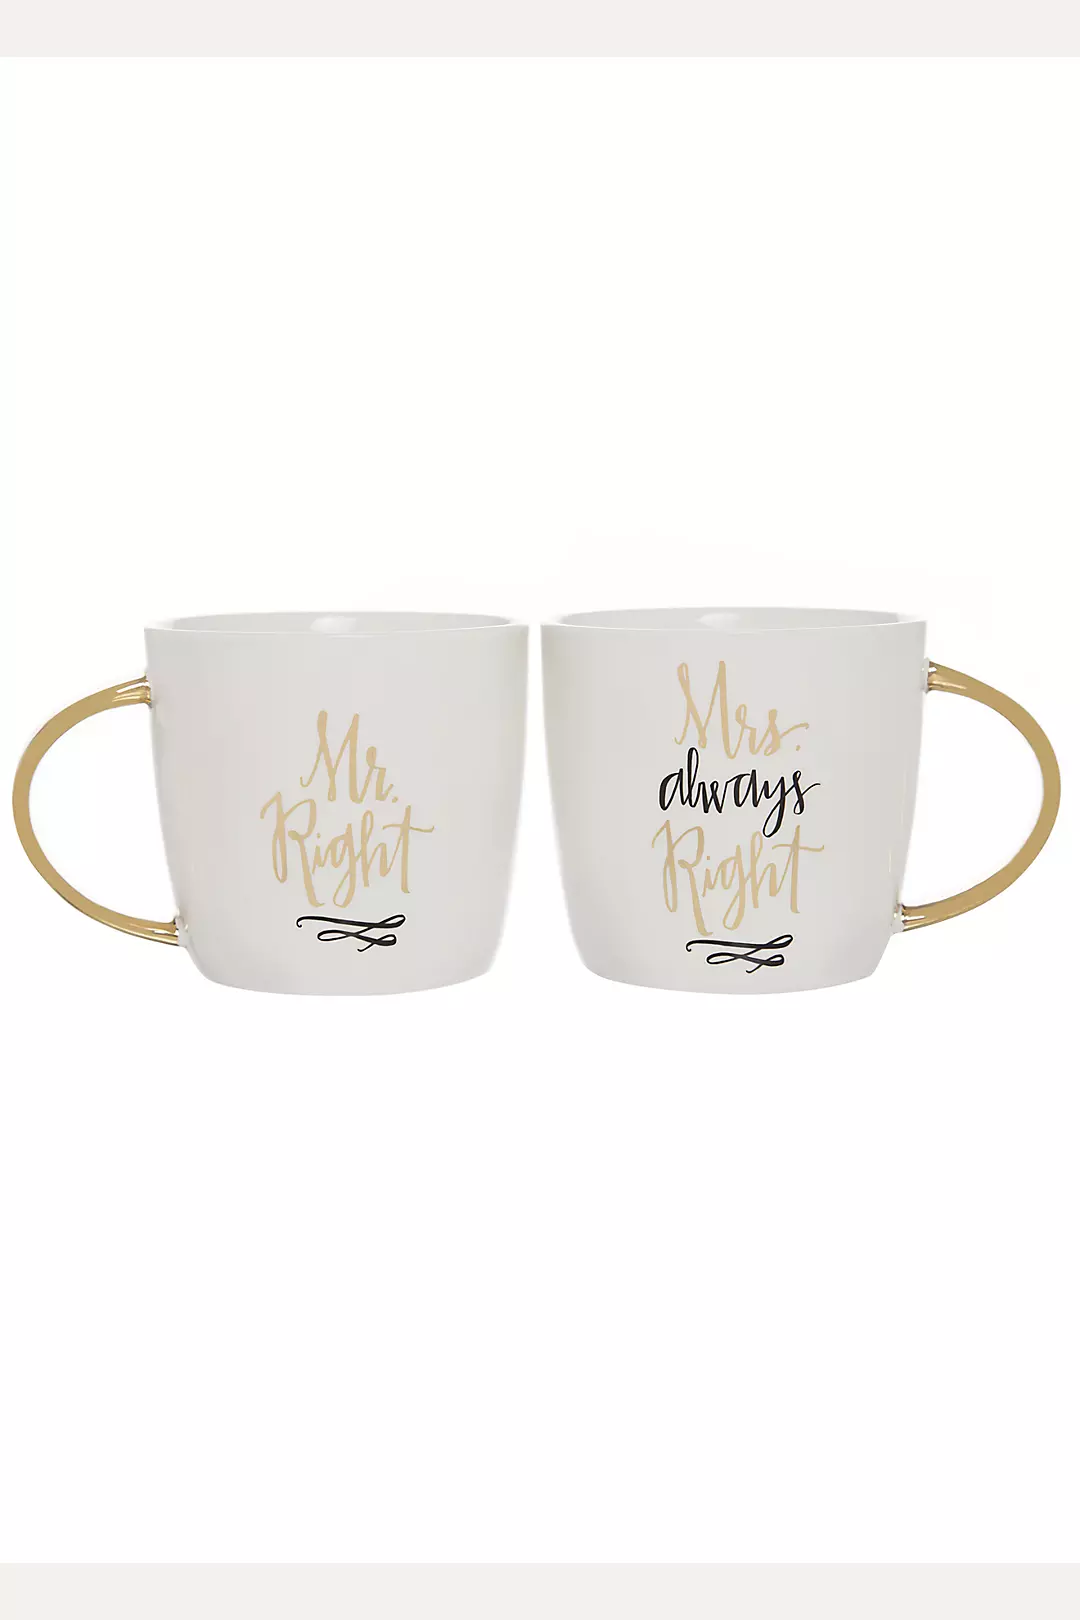 Mr Right and Mrs Always Right Mugs Set of 2 Image